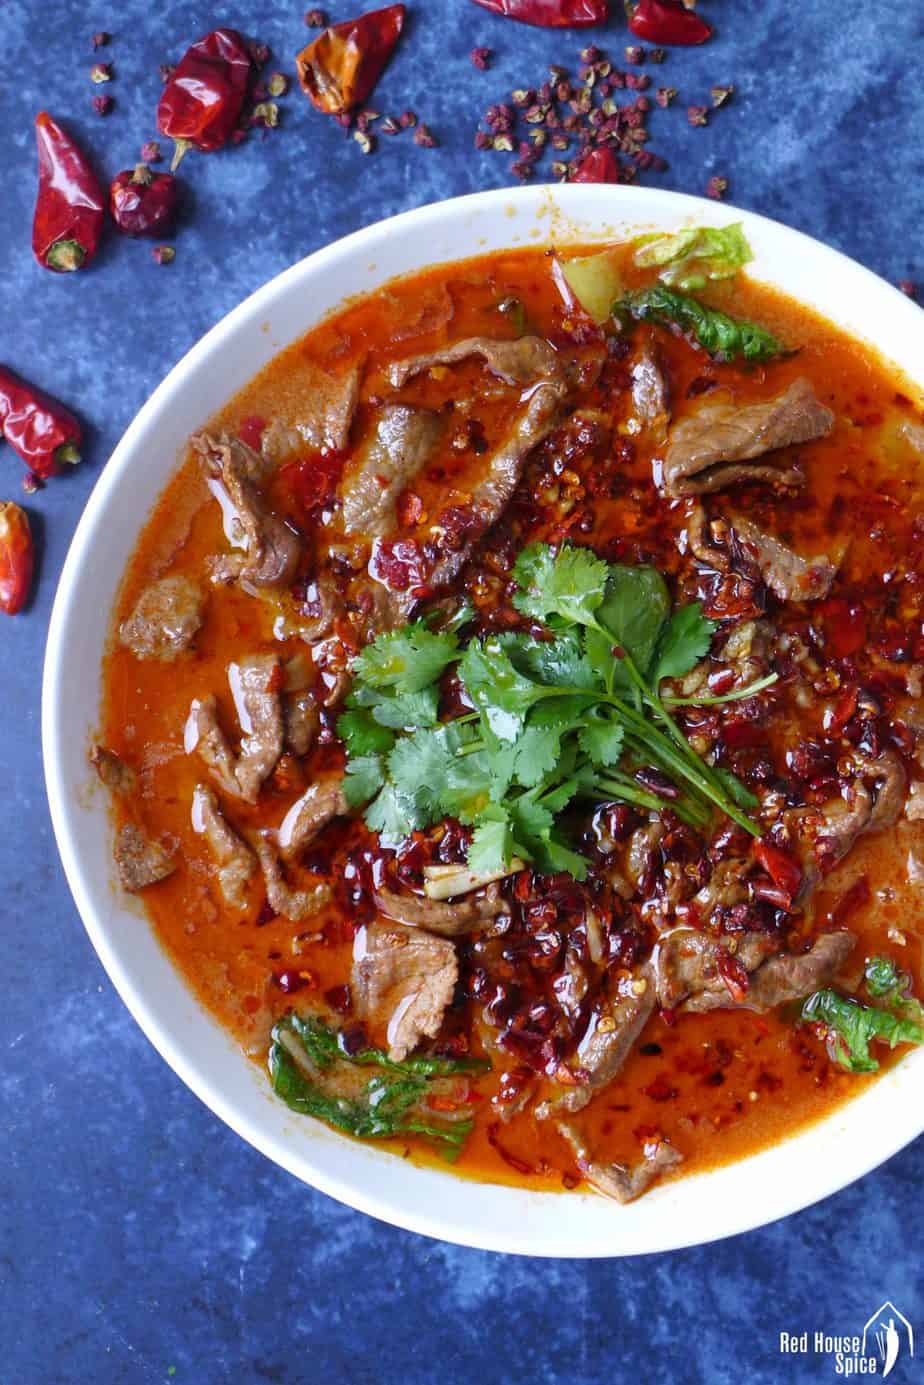 A bowl of Sichuan boiled beef